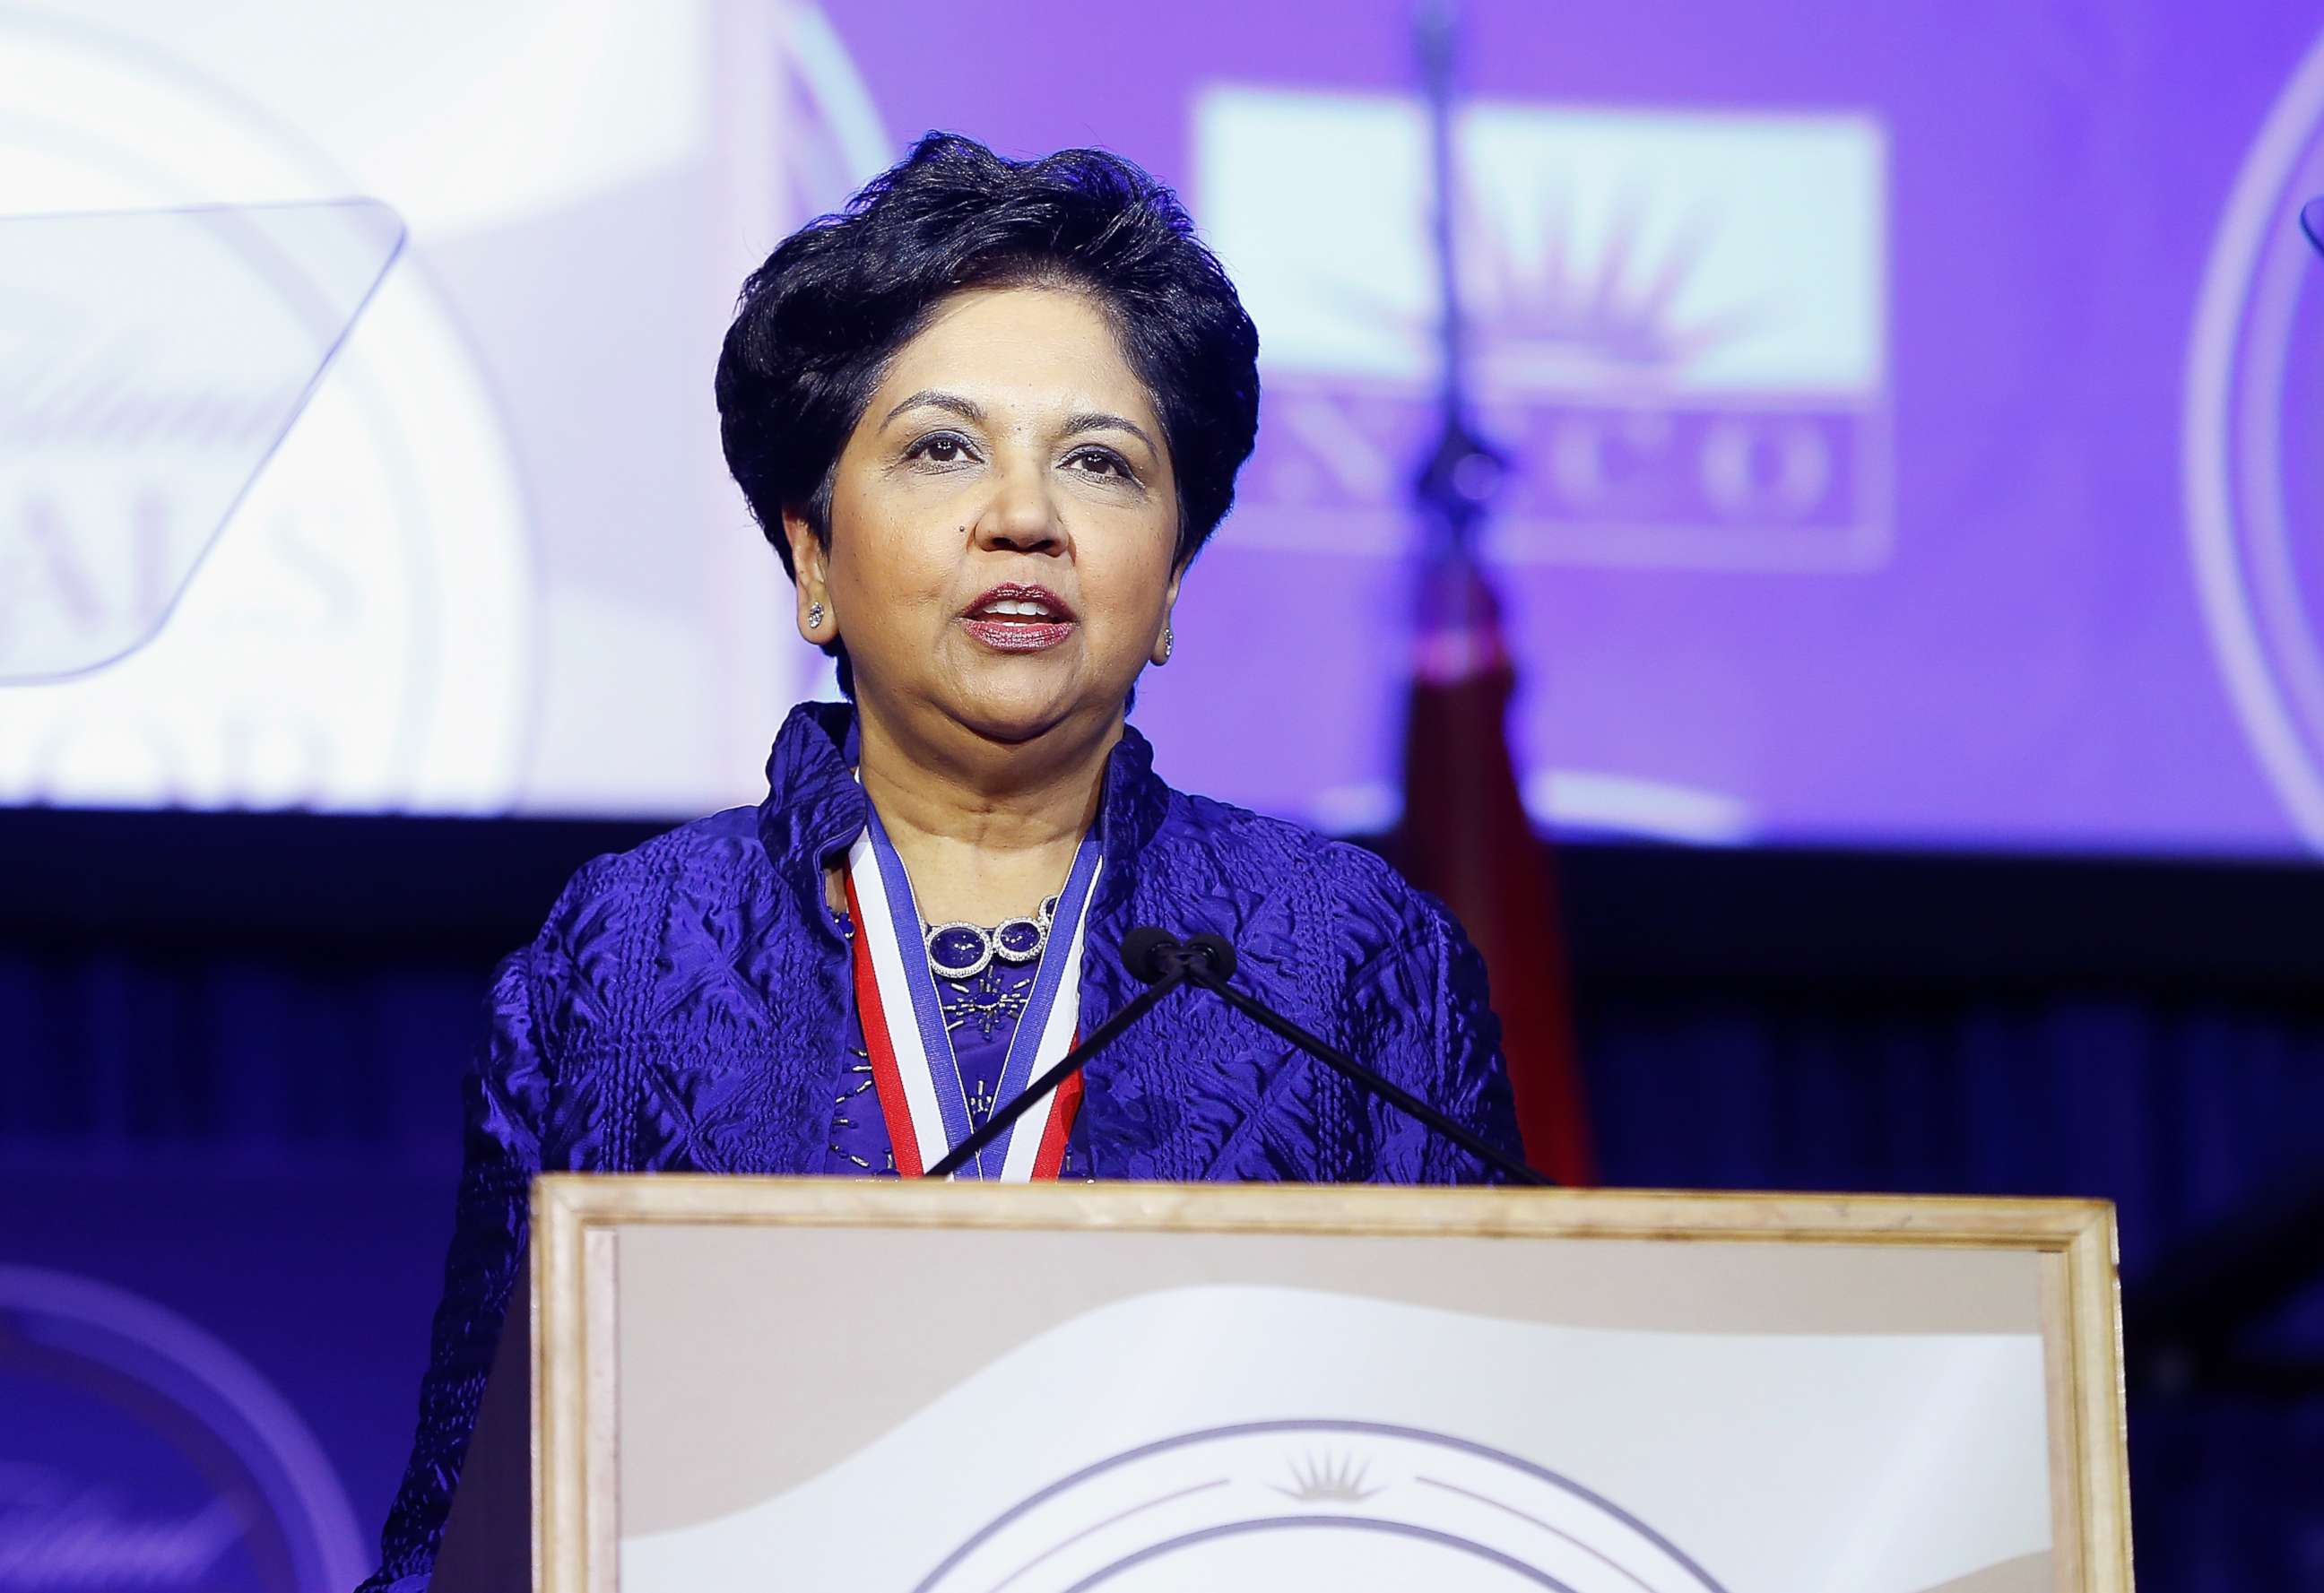 PHOTO: Chairman and CEO of PepsiCo, Indra Nooyi attends 2017 Ellis Island Medals of Honor Ceremony at Ellis Island on May 13, 2017 in New York.